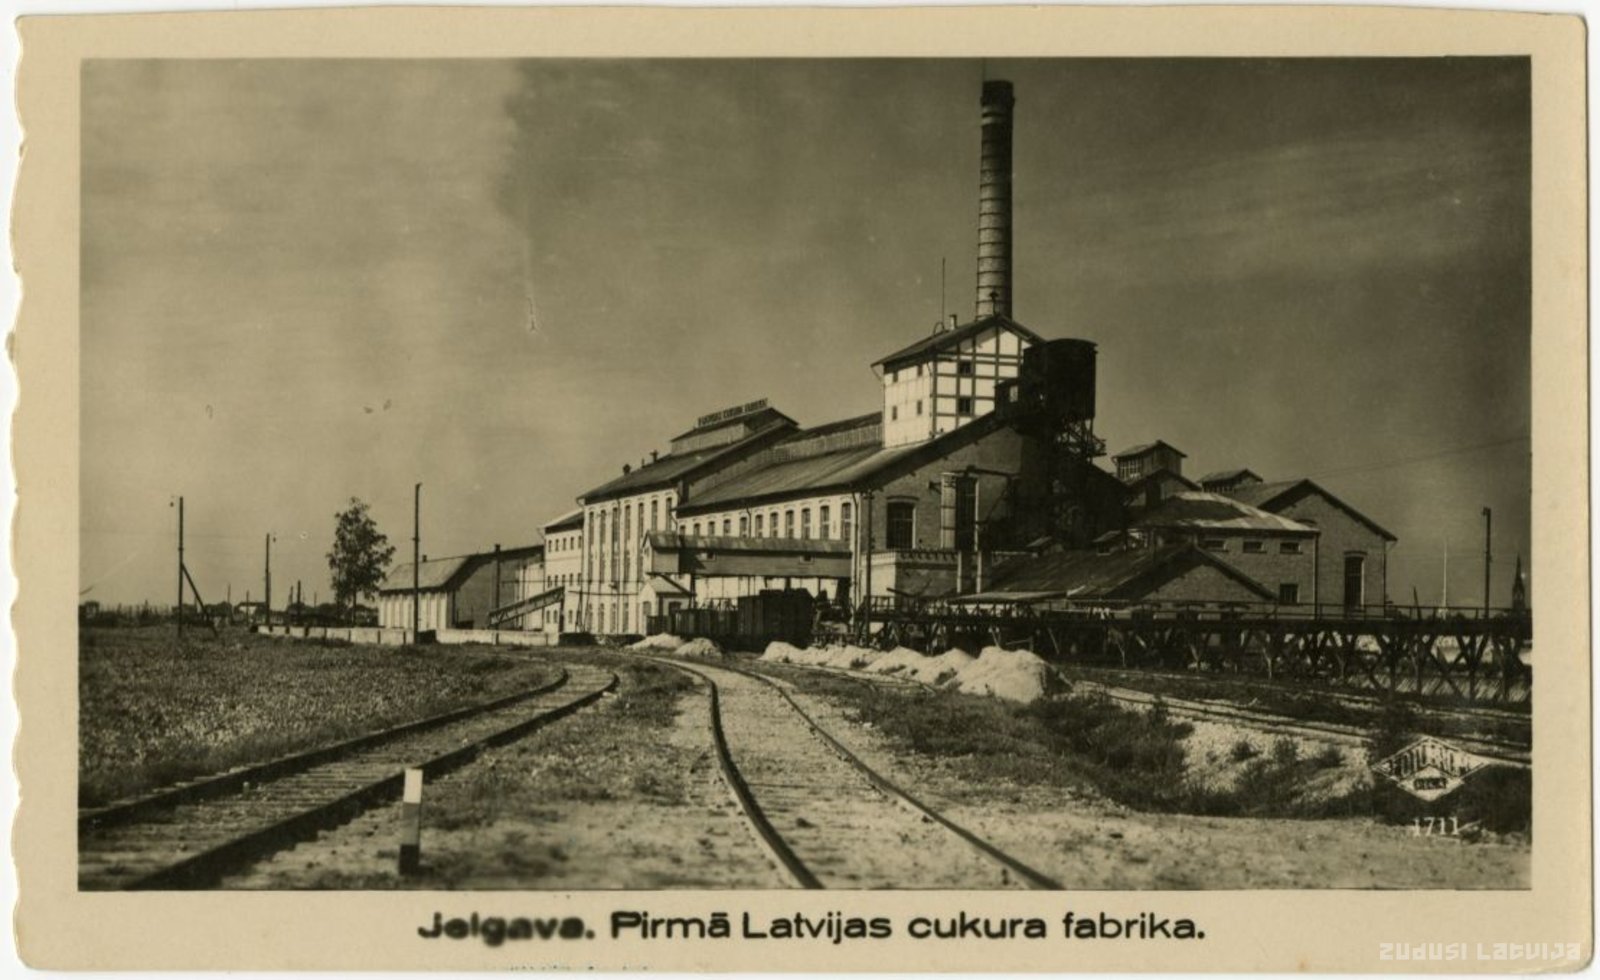 At the bottom of the open, in the middle of the script: "Jelgava. First Latvian sugar factory."